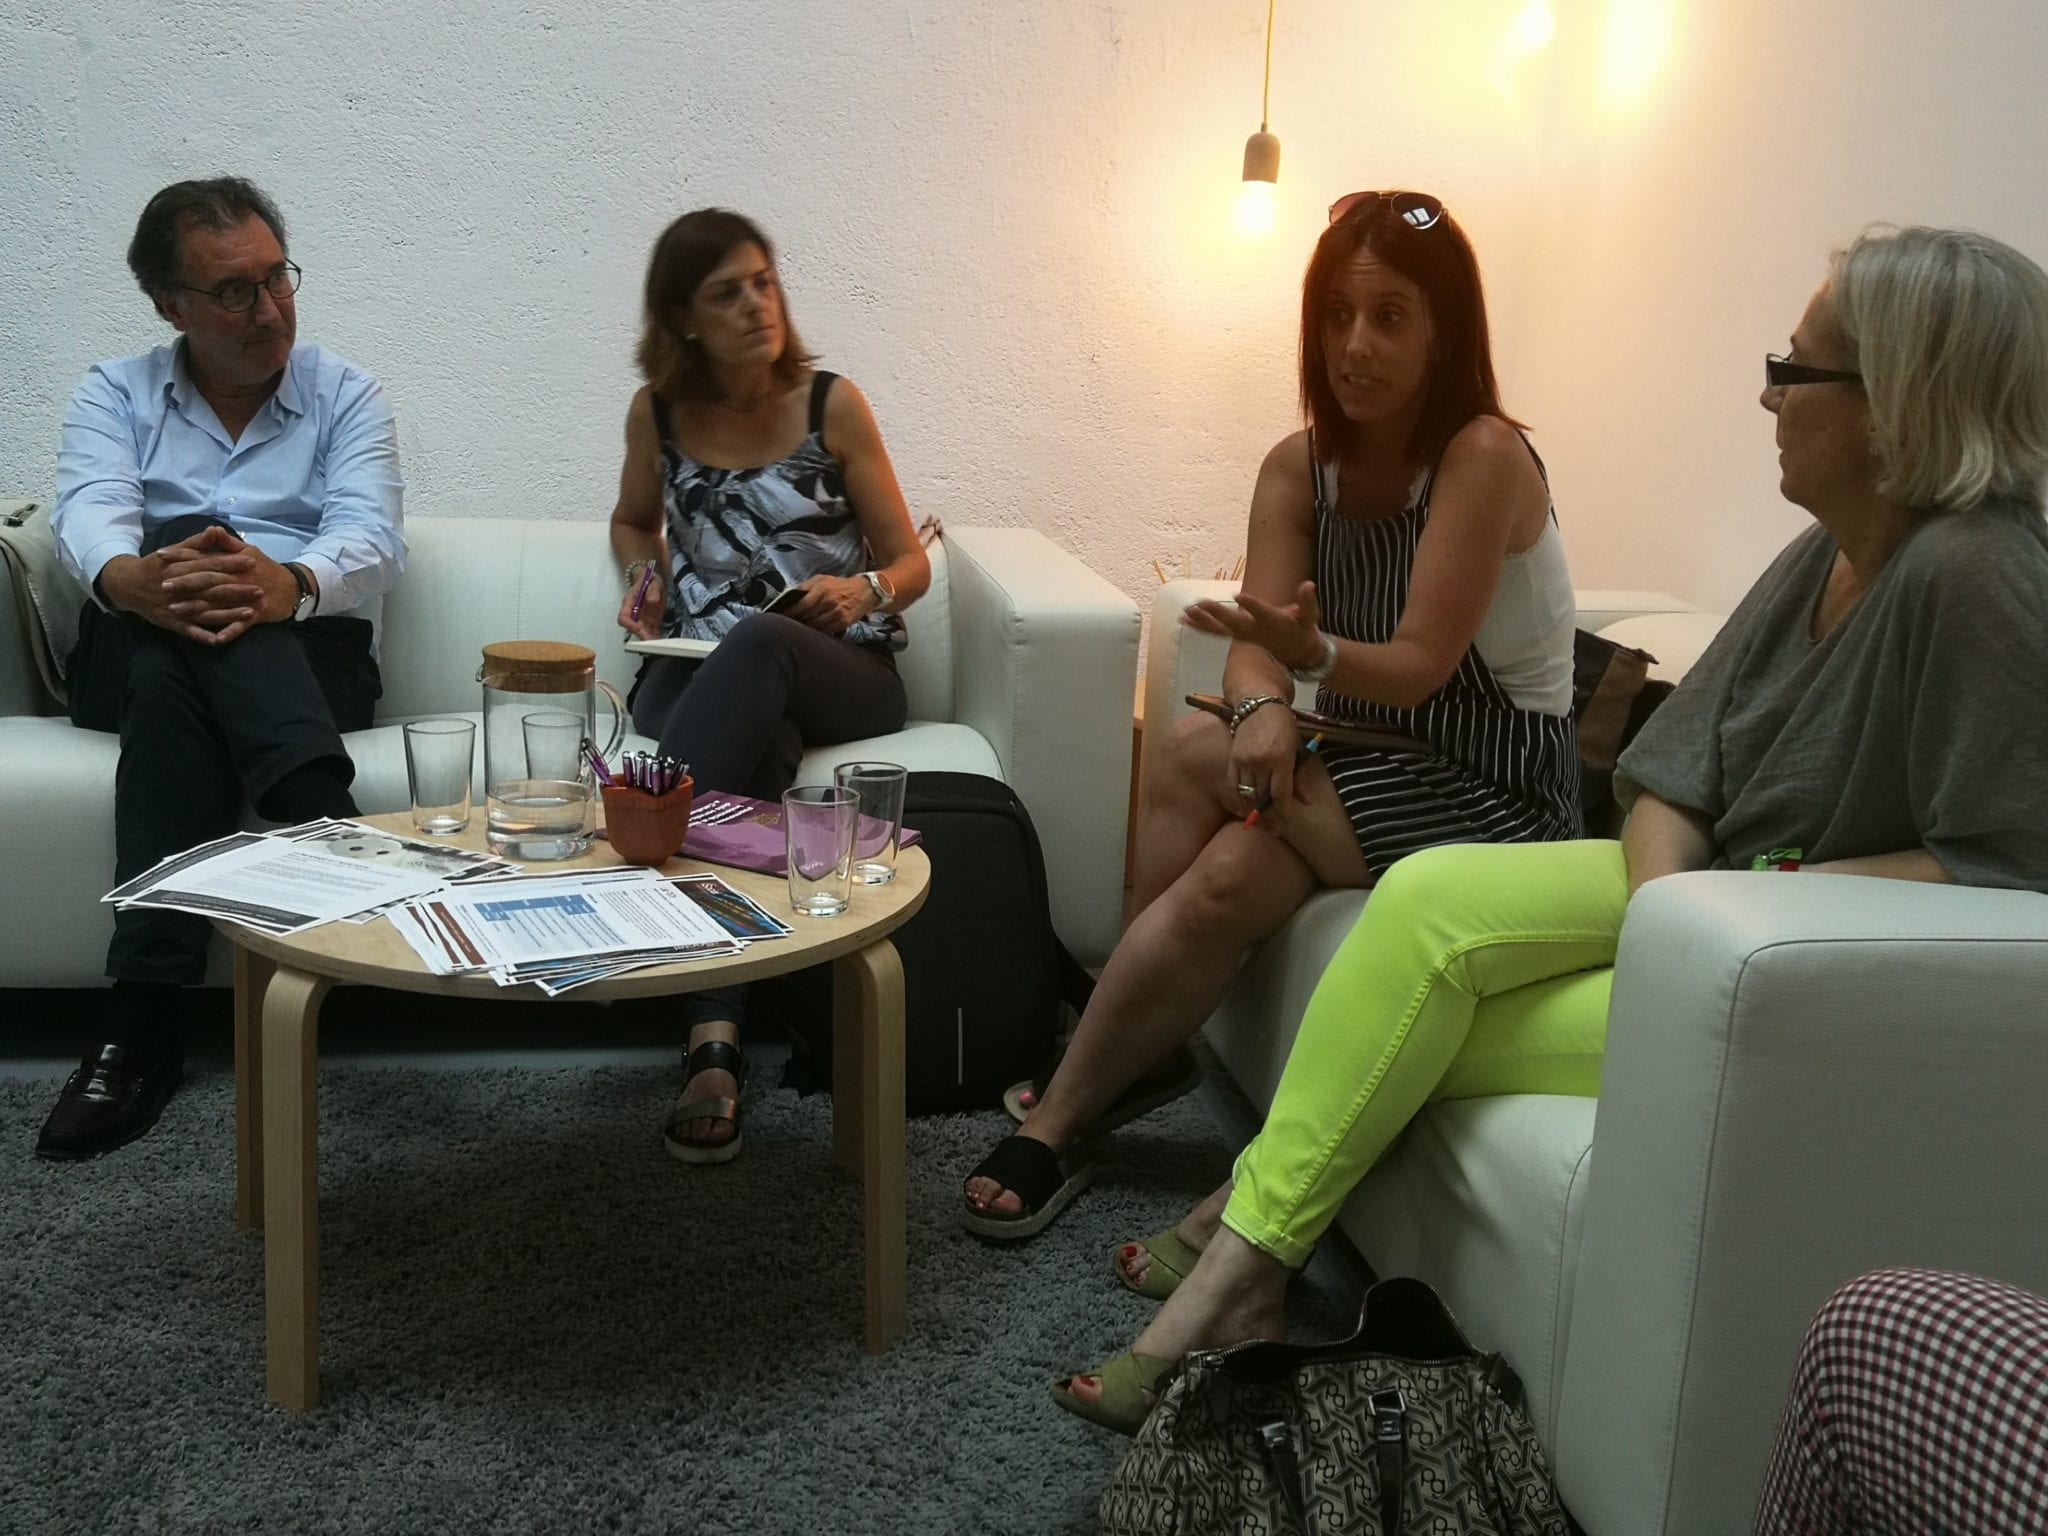 The Alzheimer’s Platform and the Maresme Foundation, the first partner-collaborating entities